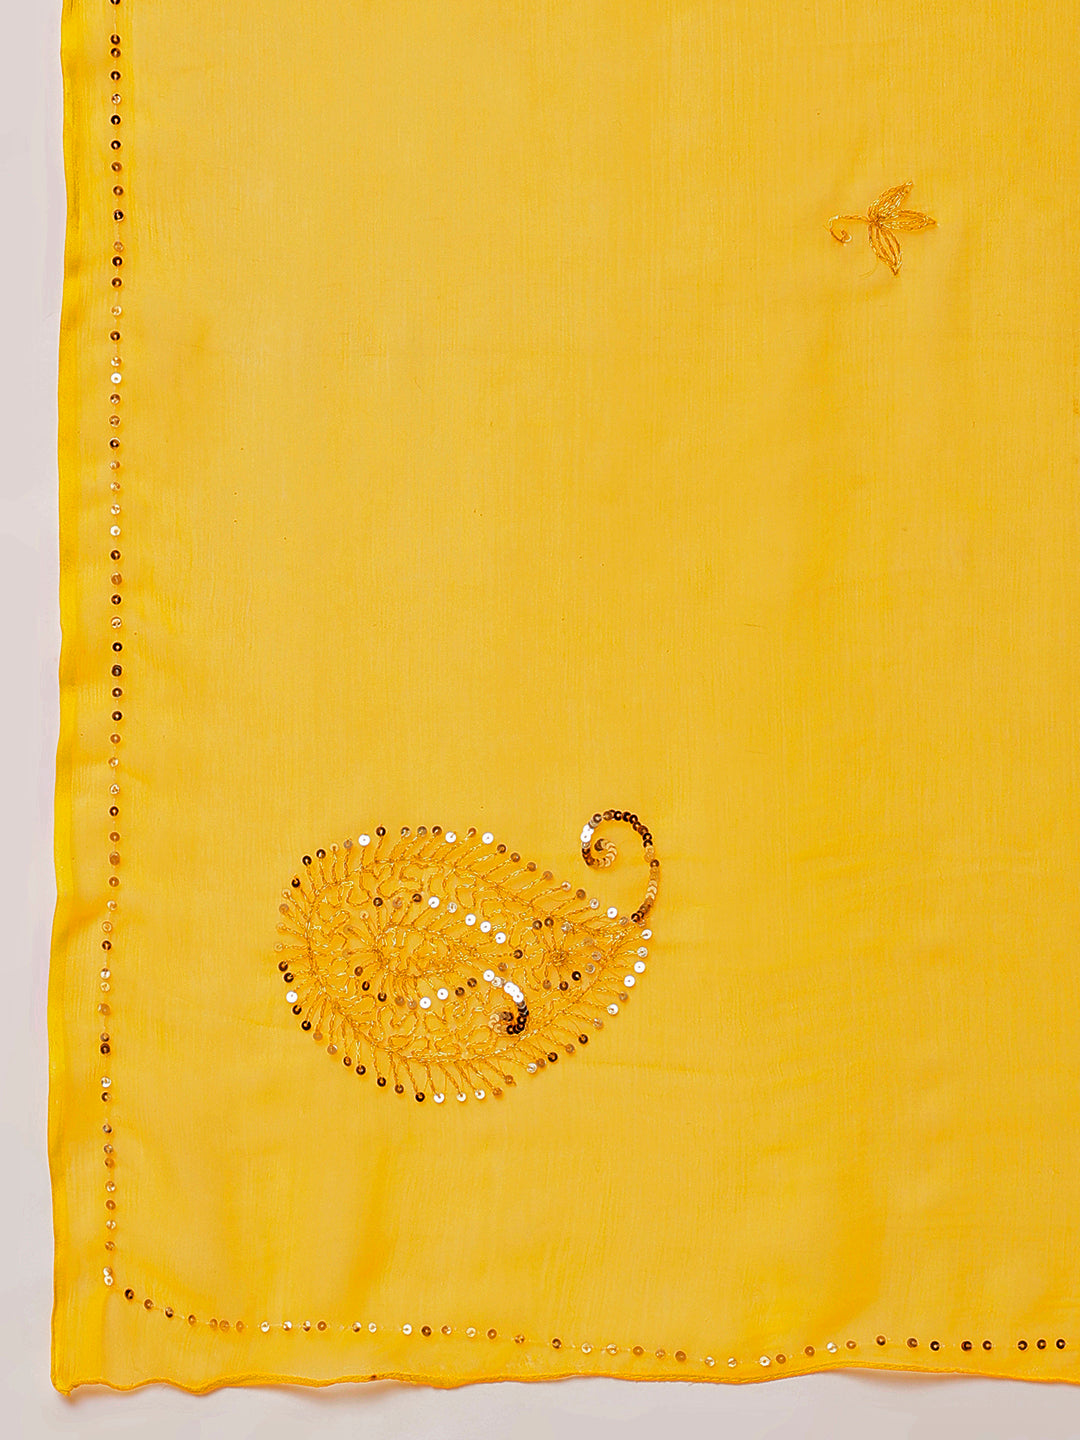 Buttercup Voile (Hand Embroidered Chiffon Saree)